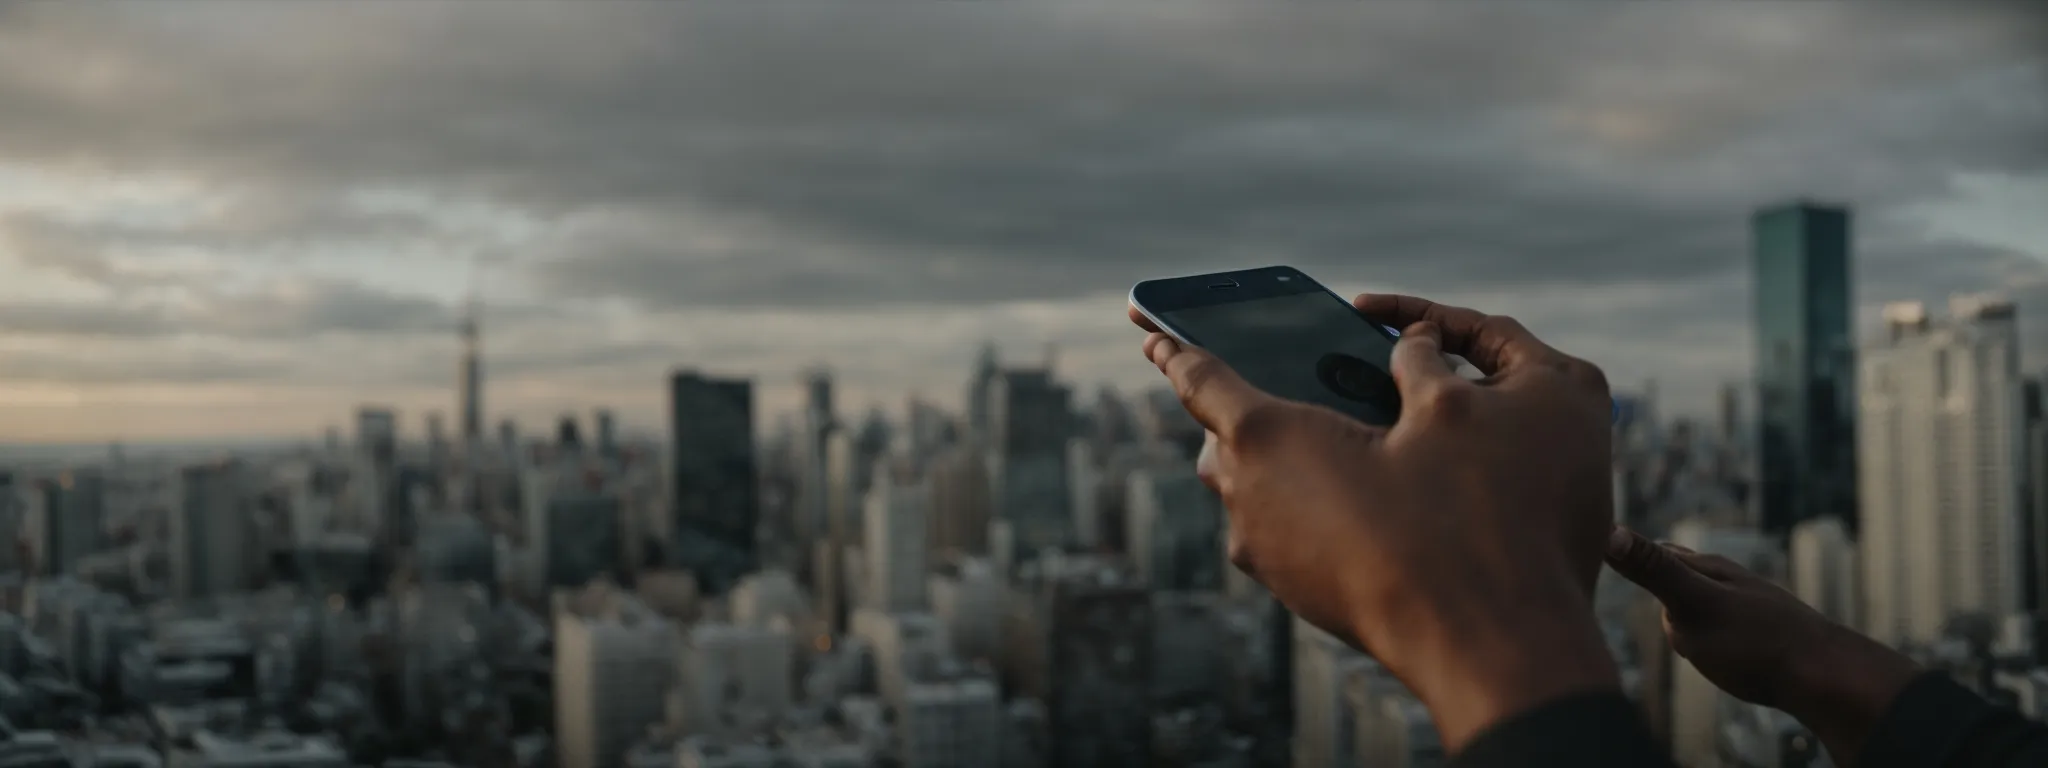 a person tapping on a smartphone with a city backdrop, symbolizing urban mobile connectivity.